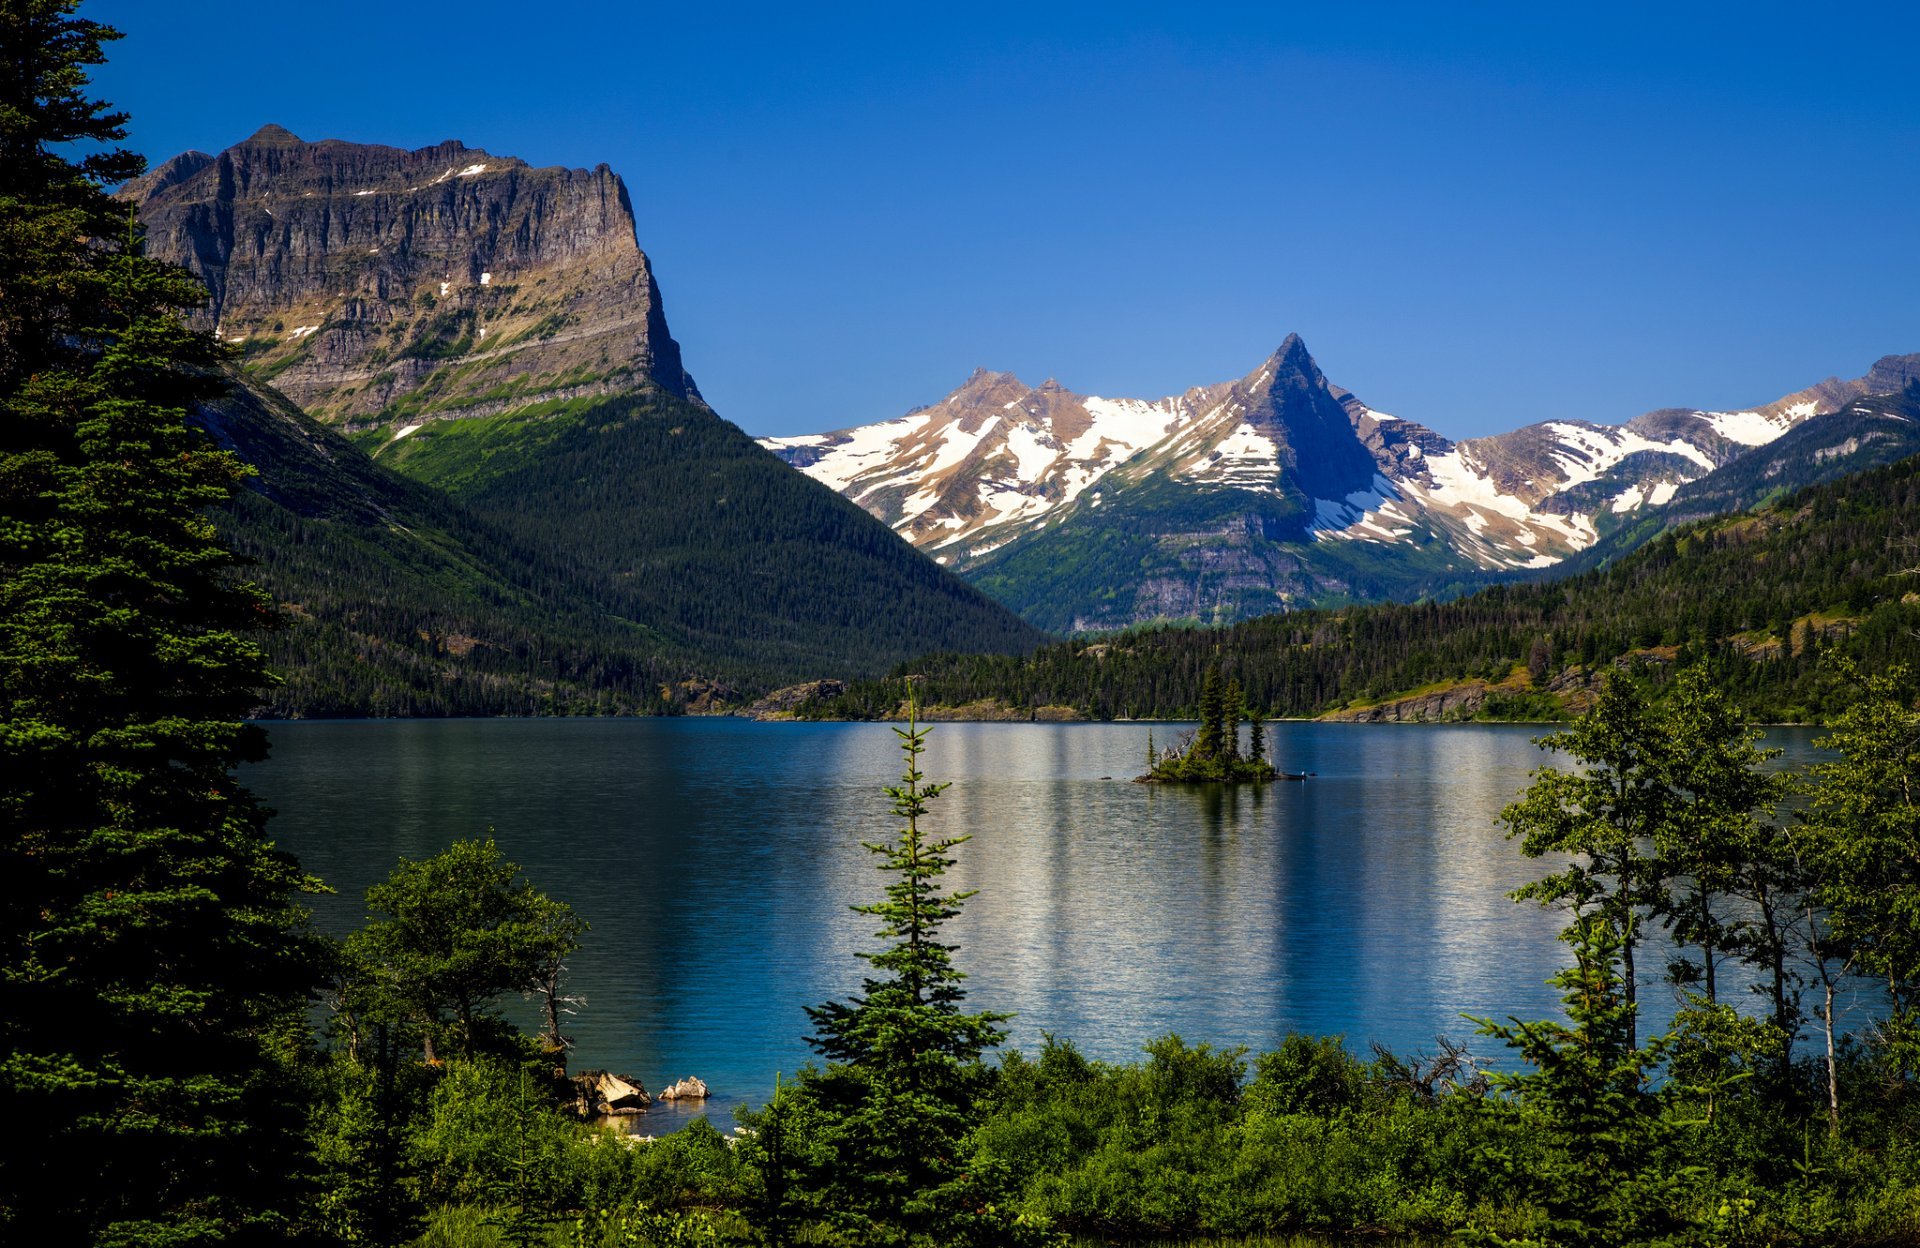 Saint Mary Lake Backgrounds, Compatible - PC, Mobile, Gadgets| 1920x1248 px